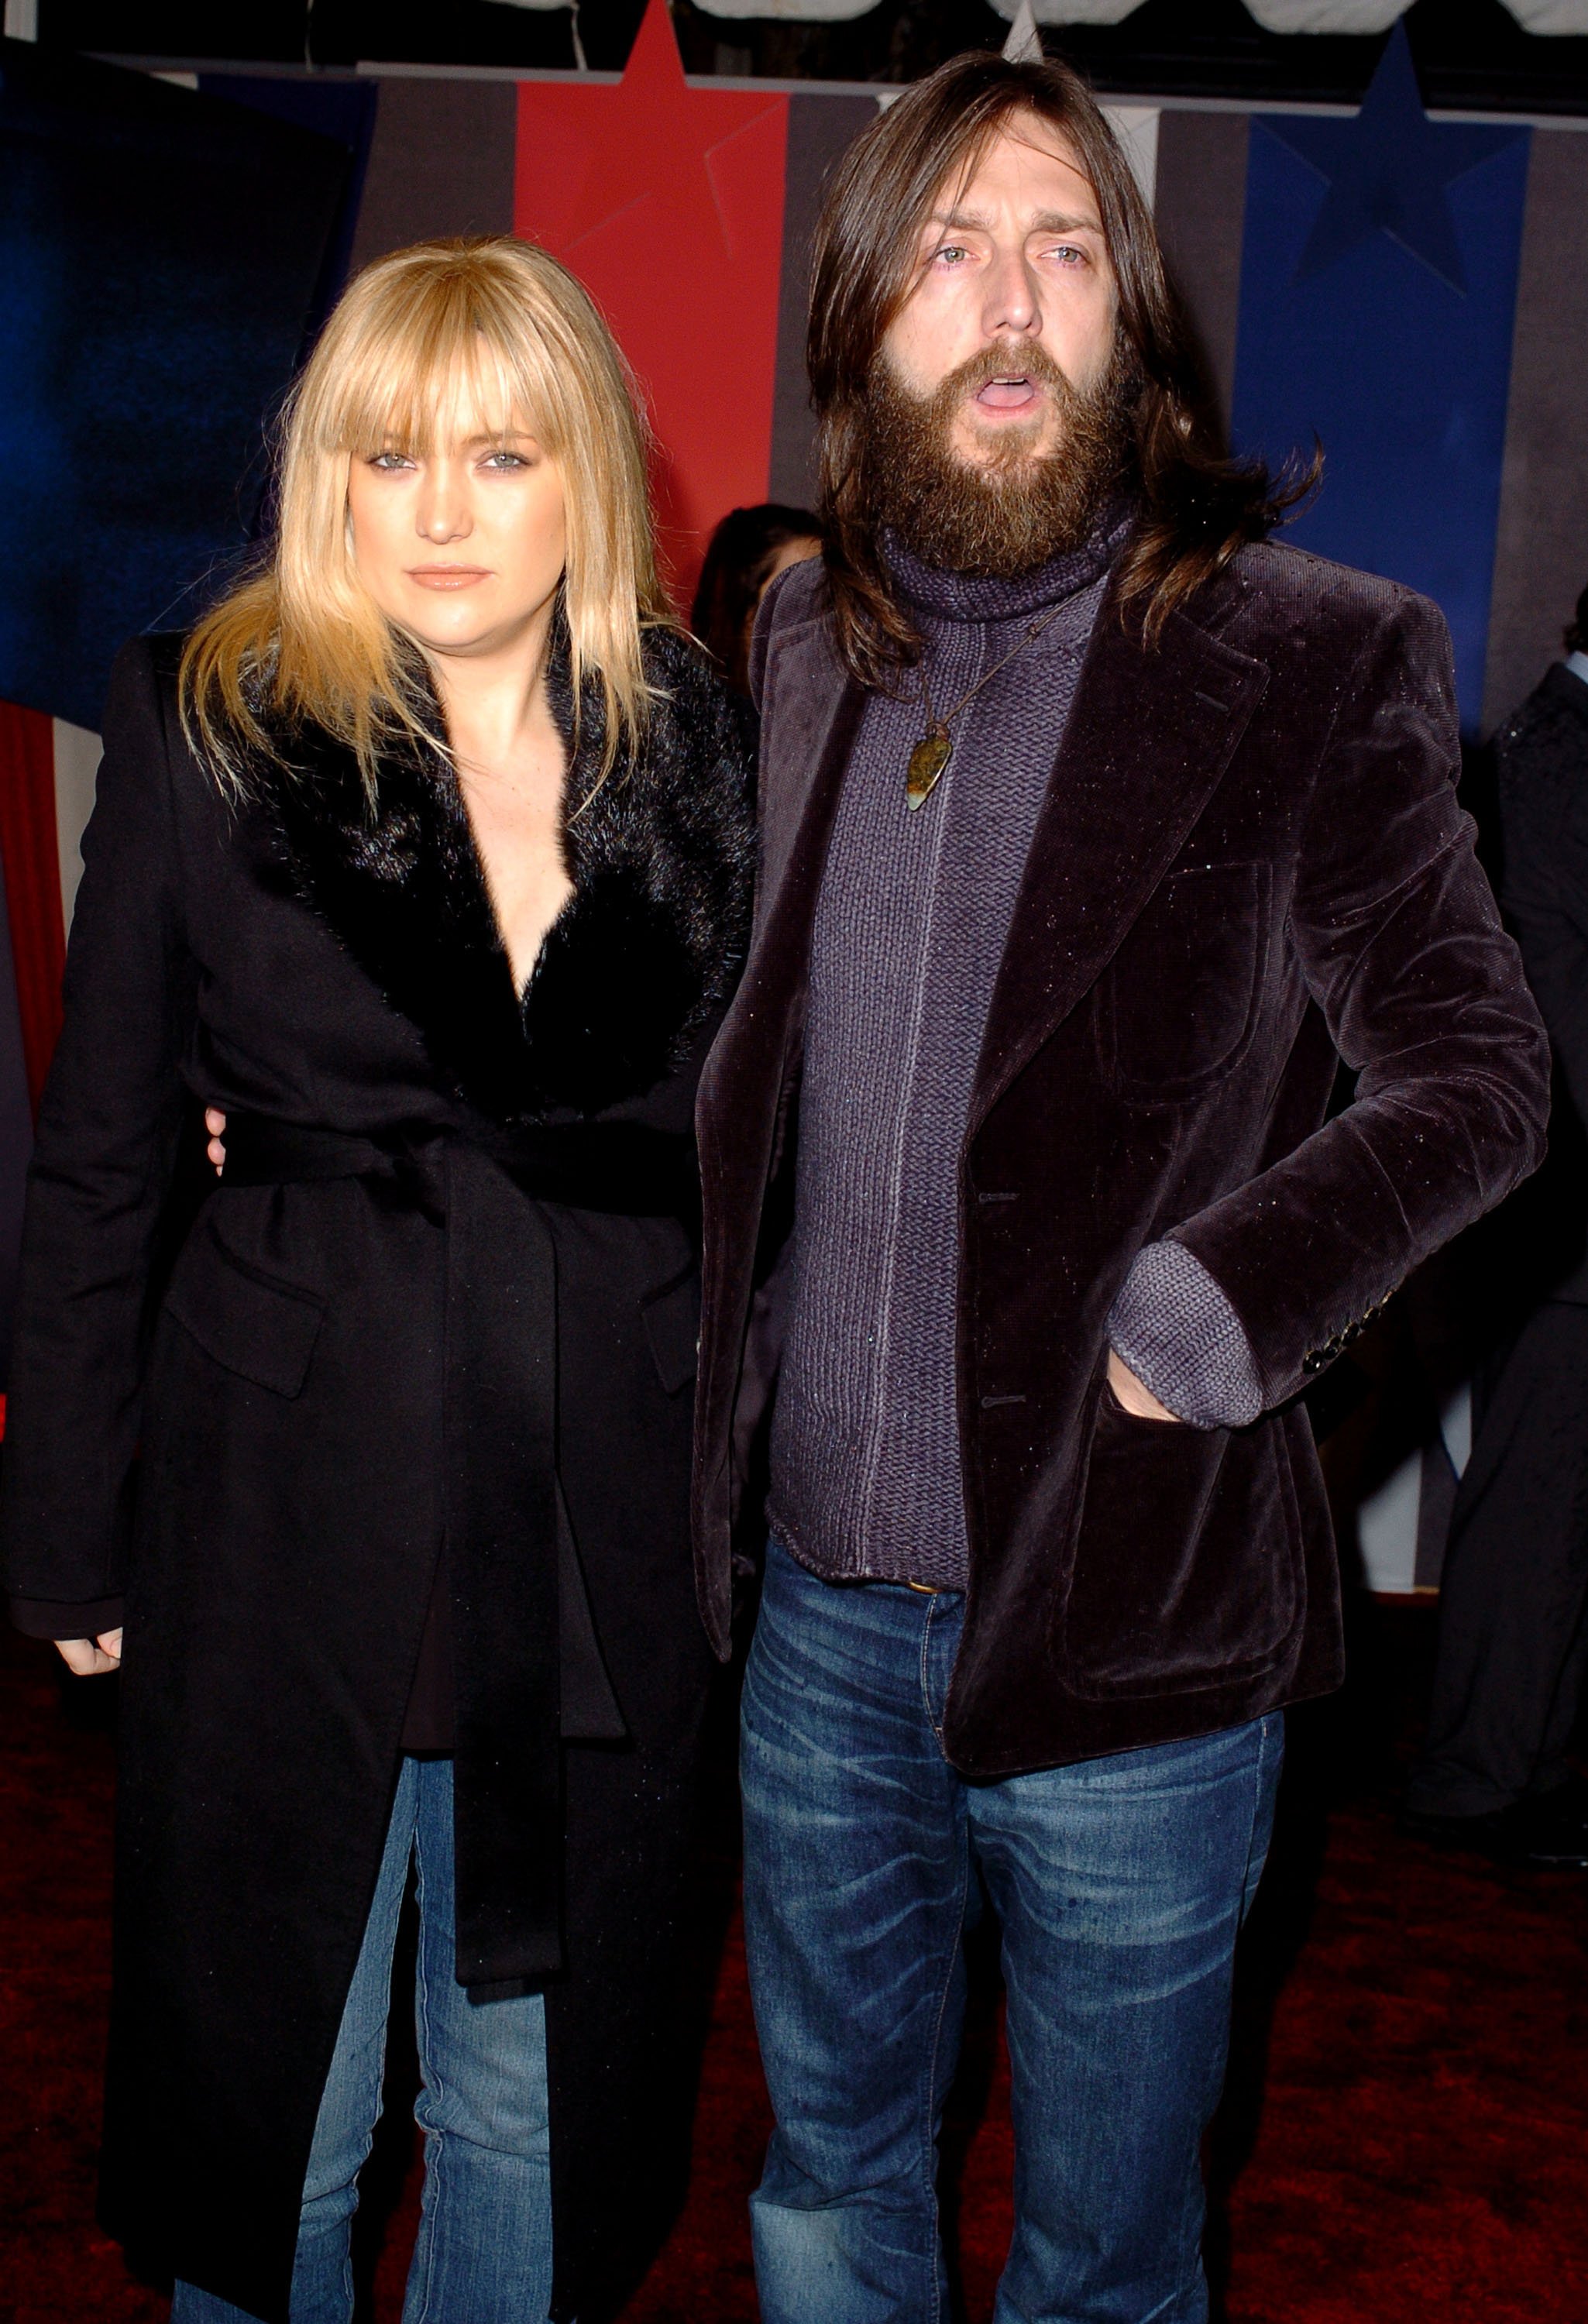 Kate Hudson and Chris Robinson during "Miracle" premiere at El Capitan Theatre in Hollywood, California. / Source: Getty Images